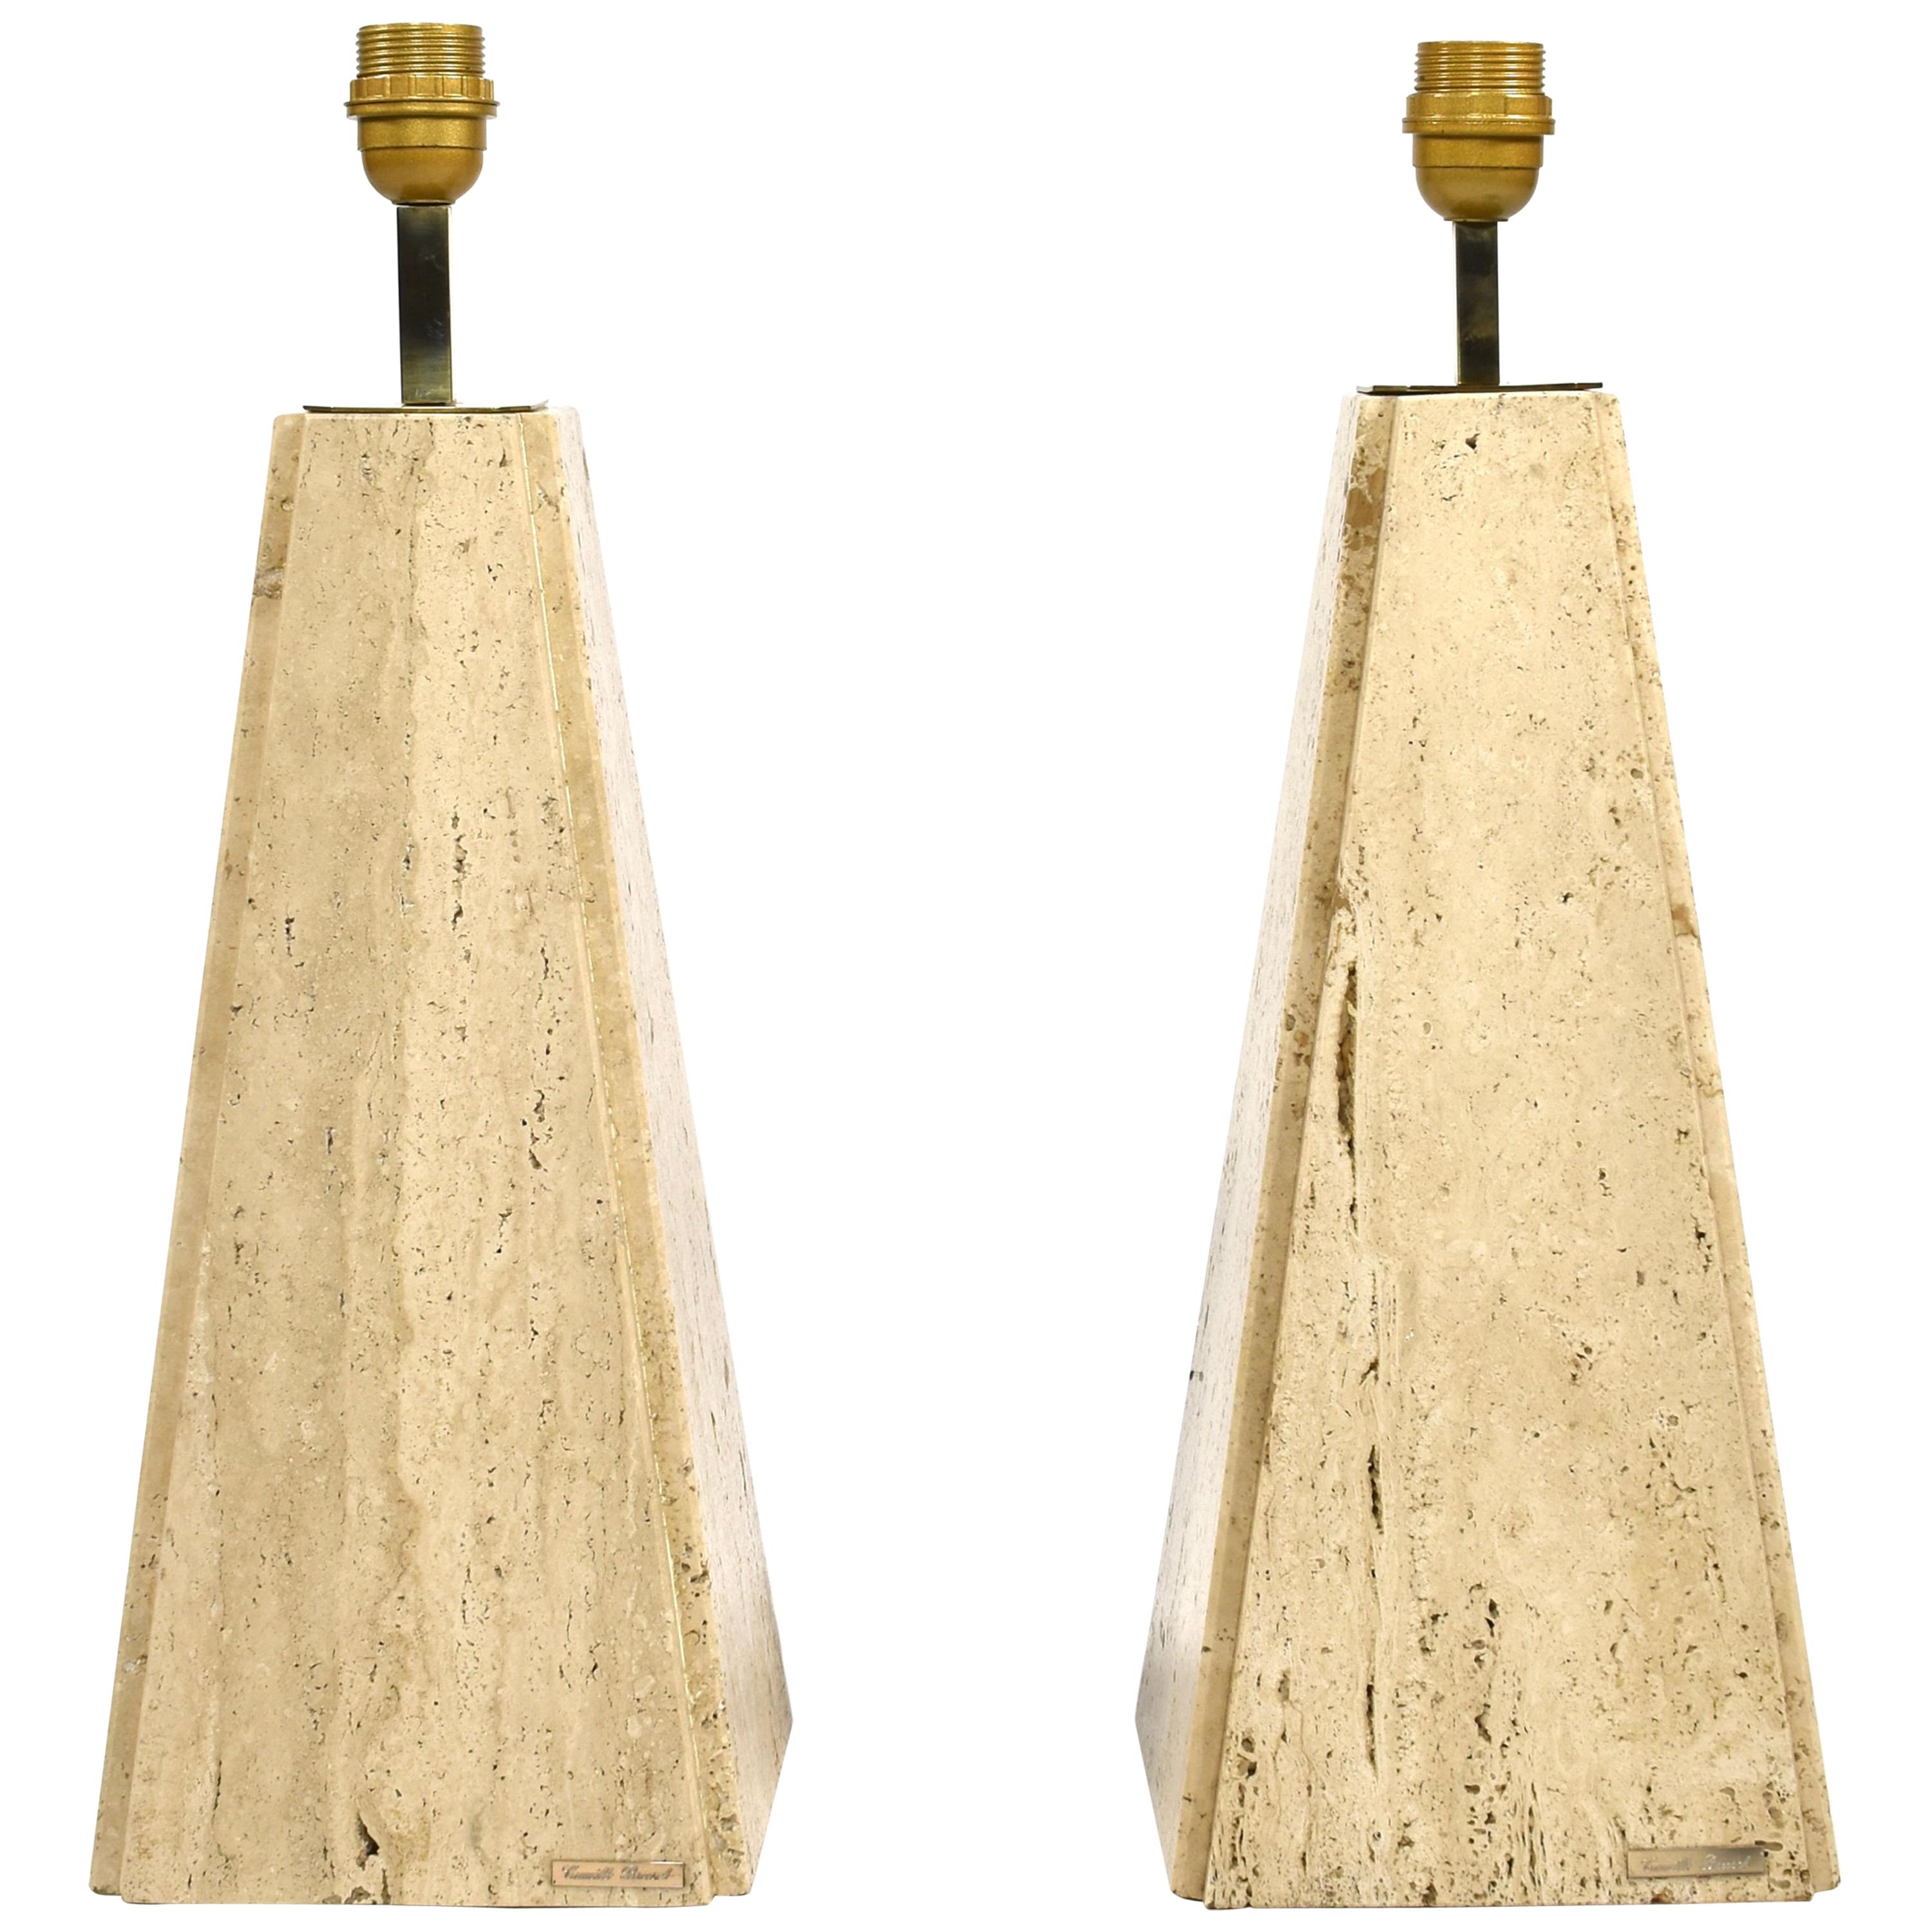 Pair of Camille Breesch Travertine and Brass Table Lamps, Belgium, circa 1970